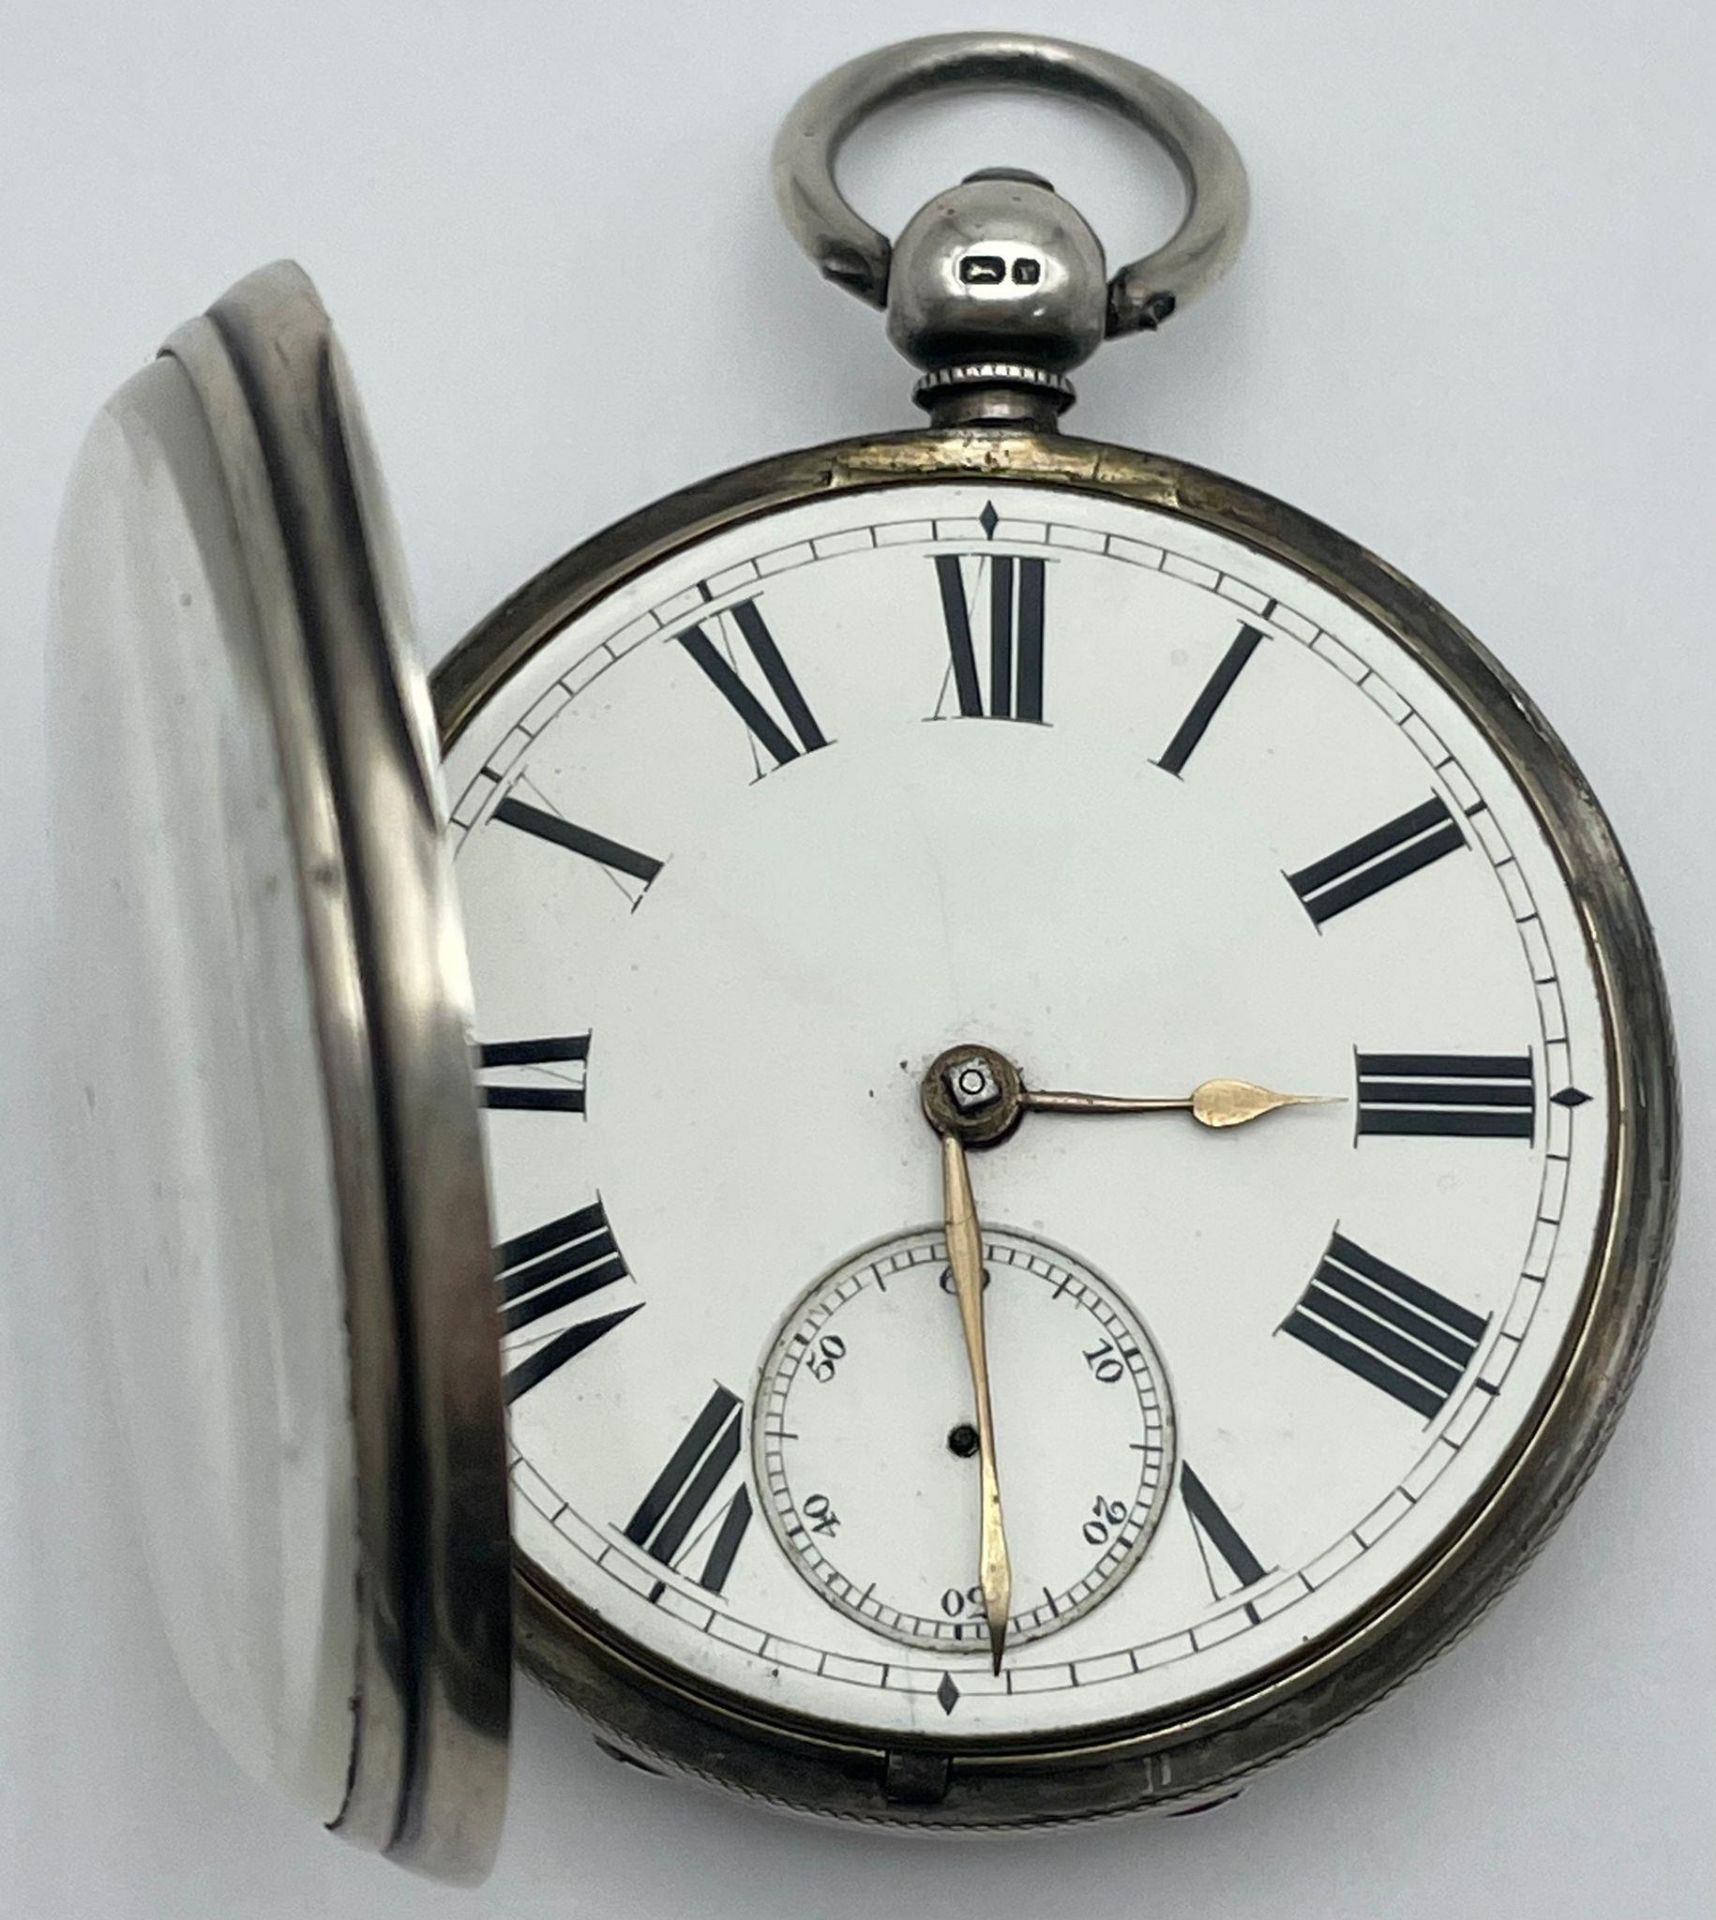 A Waltham Pocket Watch, Top winder, Hallmarked Silver in Good Condition (overwound), Plus Solid - Image 8 of 10